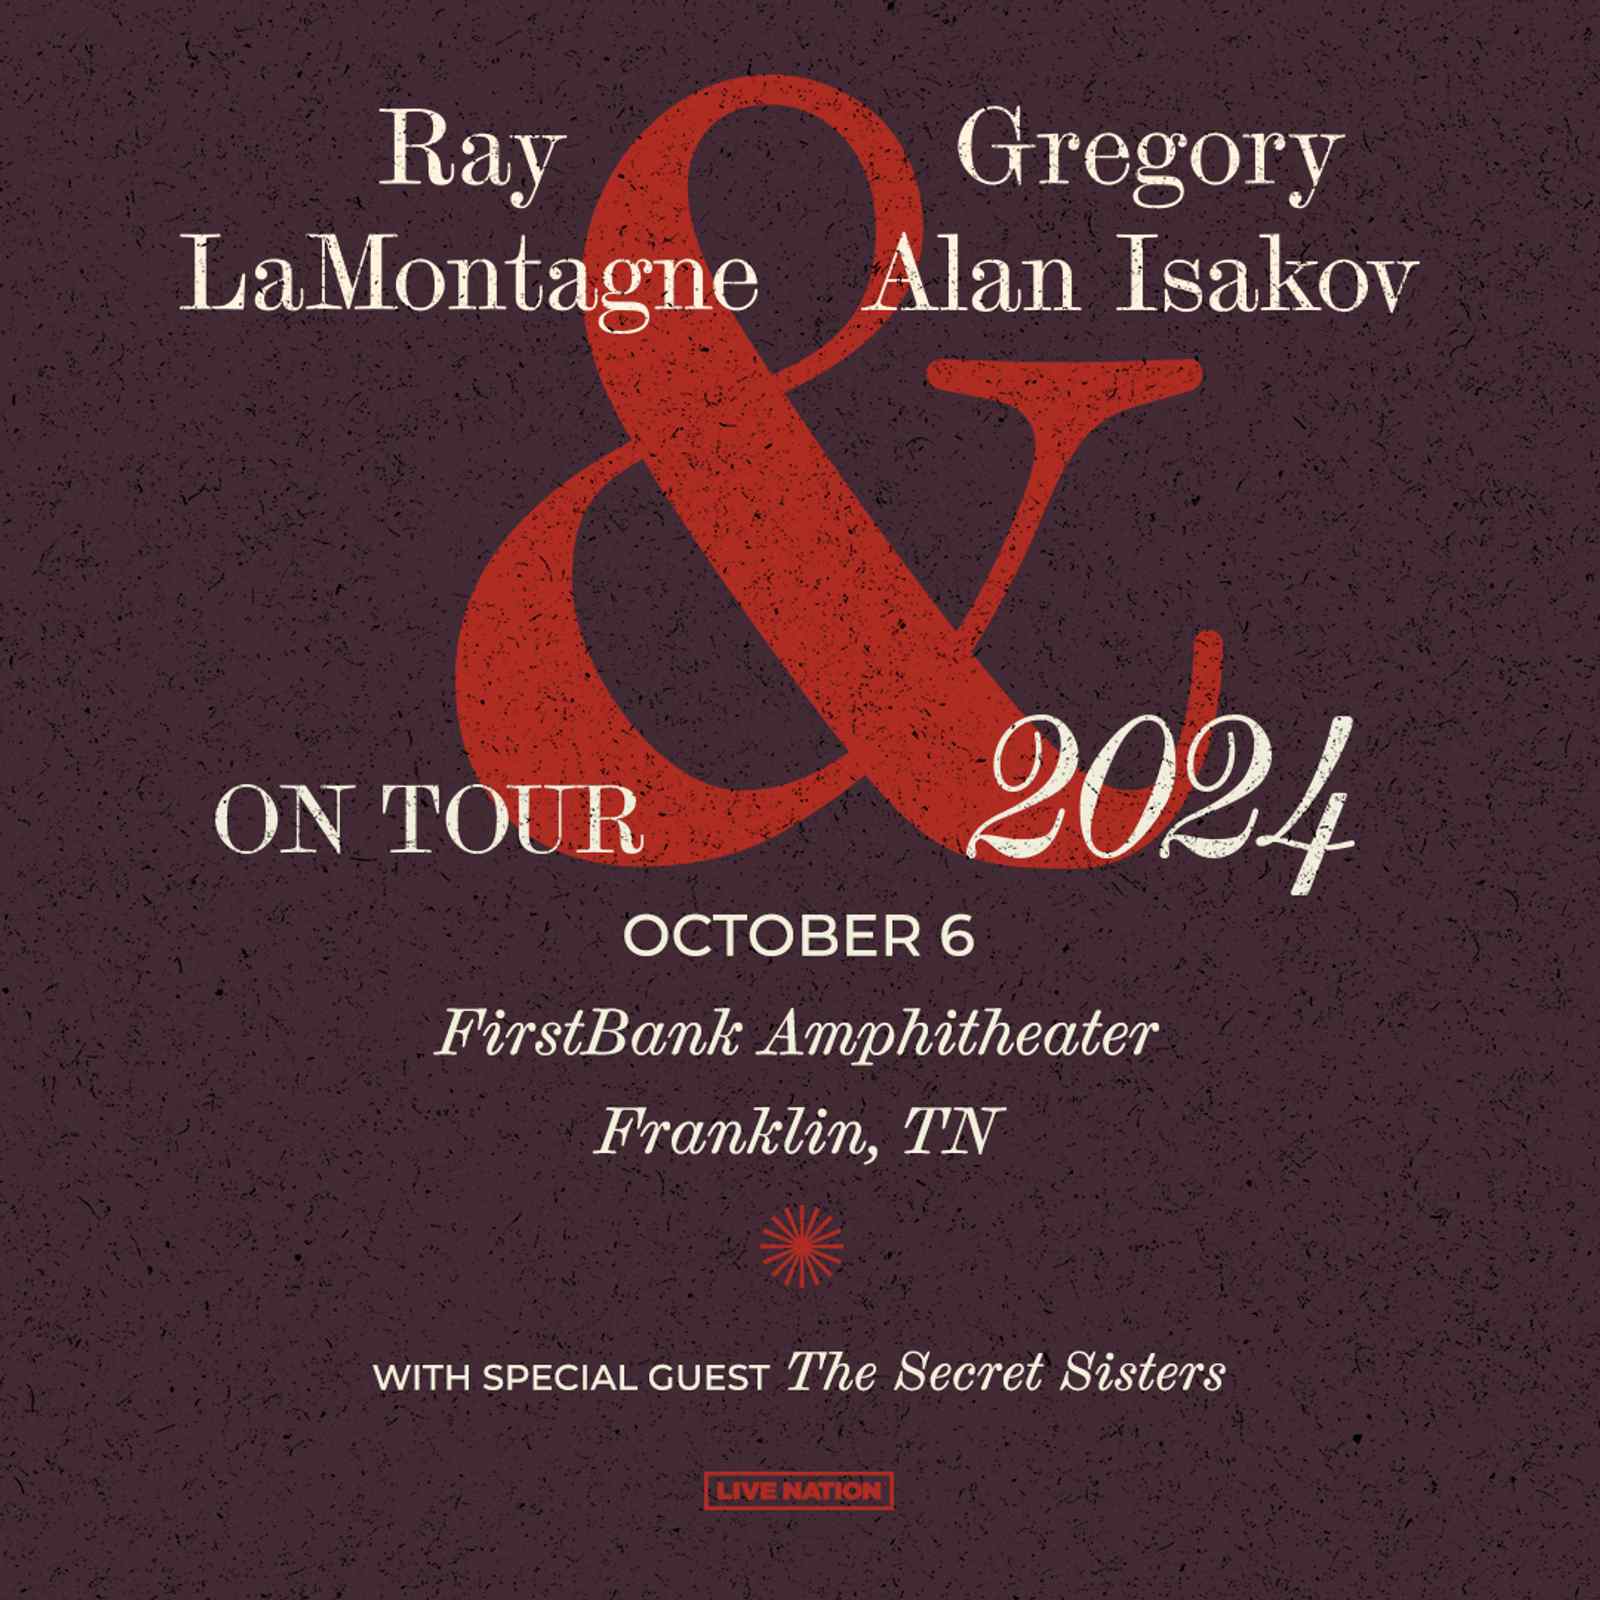 Ray LaMontagne & Gregory Alan Isakov with special guests The Secret Sisters - 7:00 PM